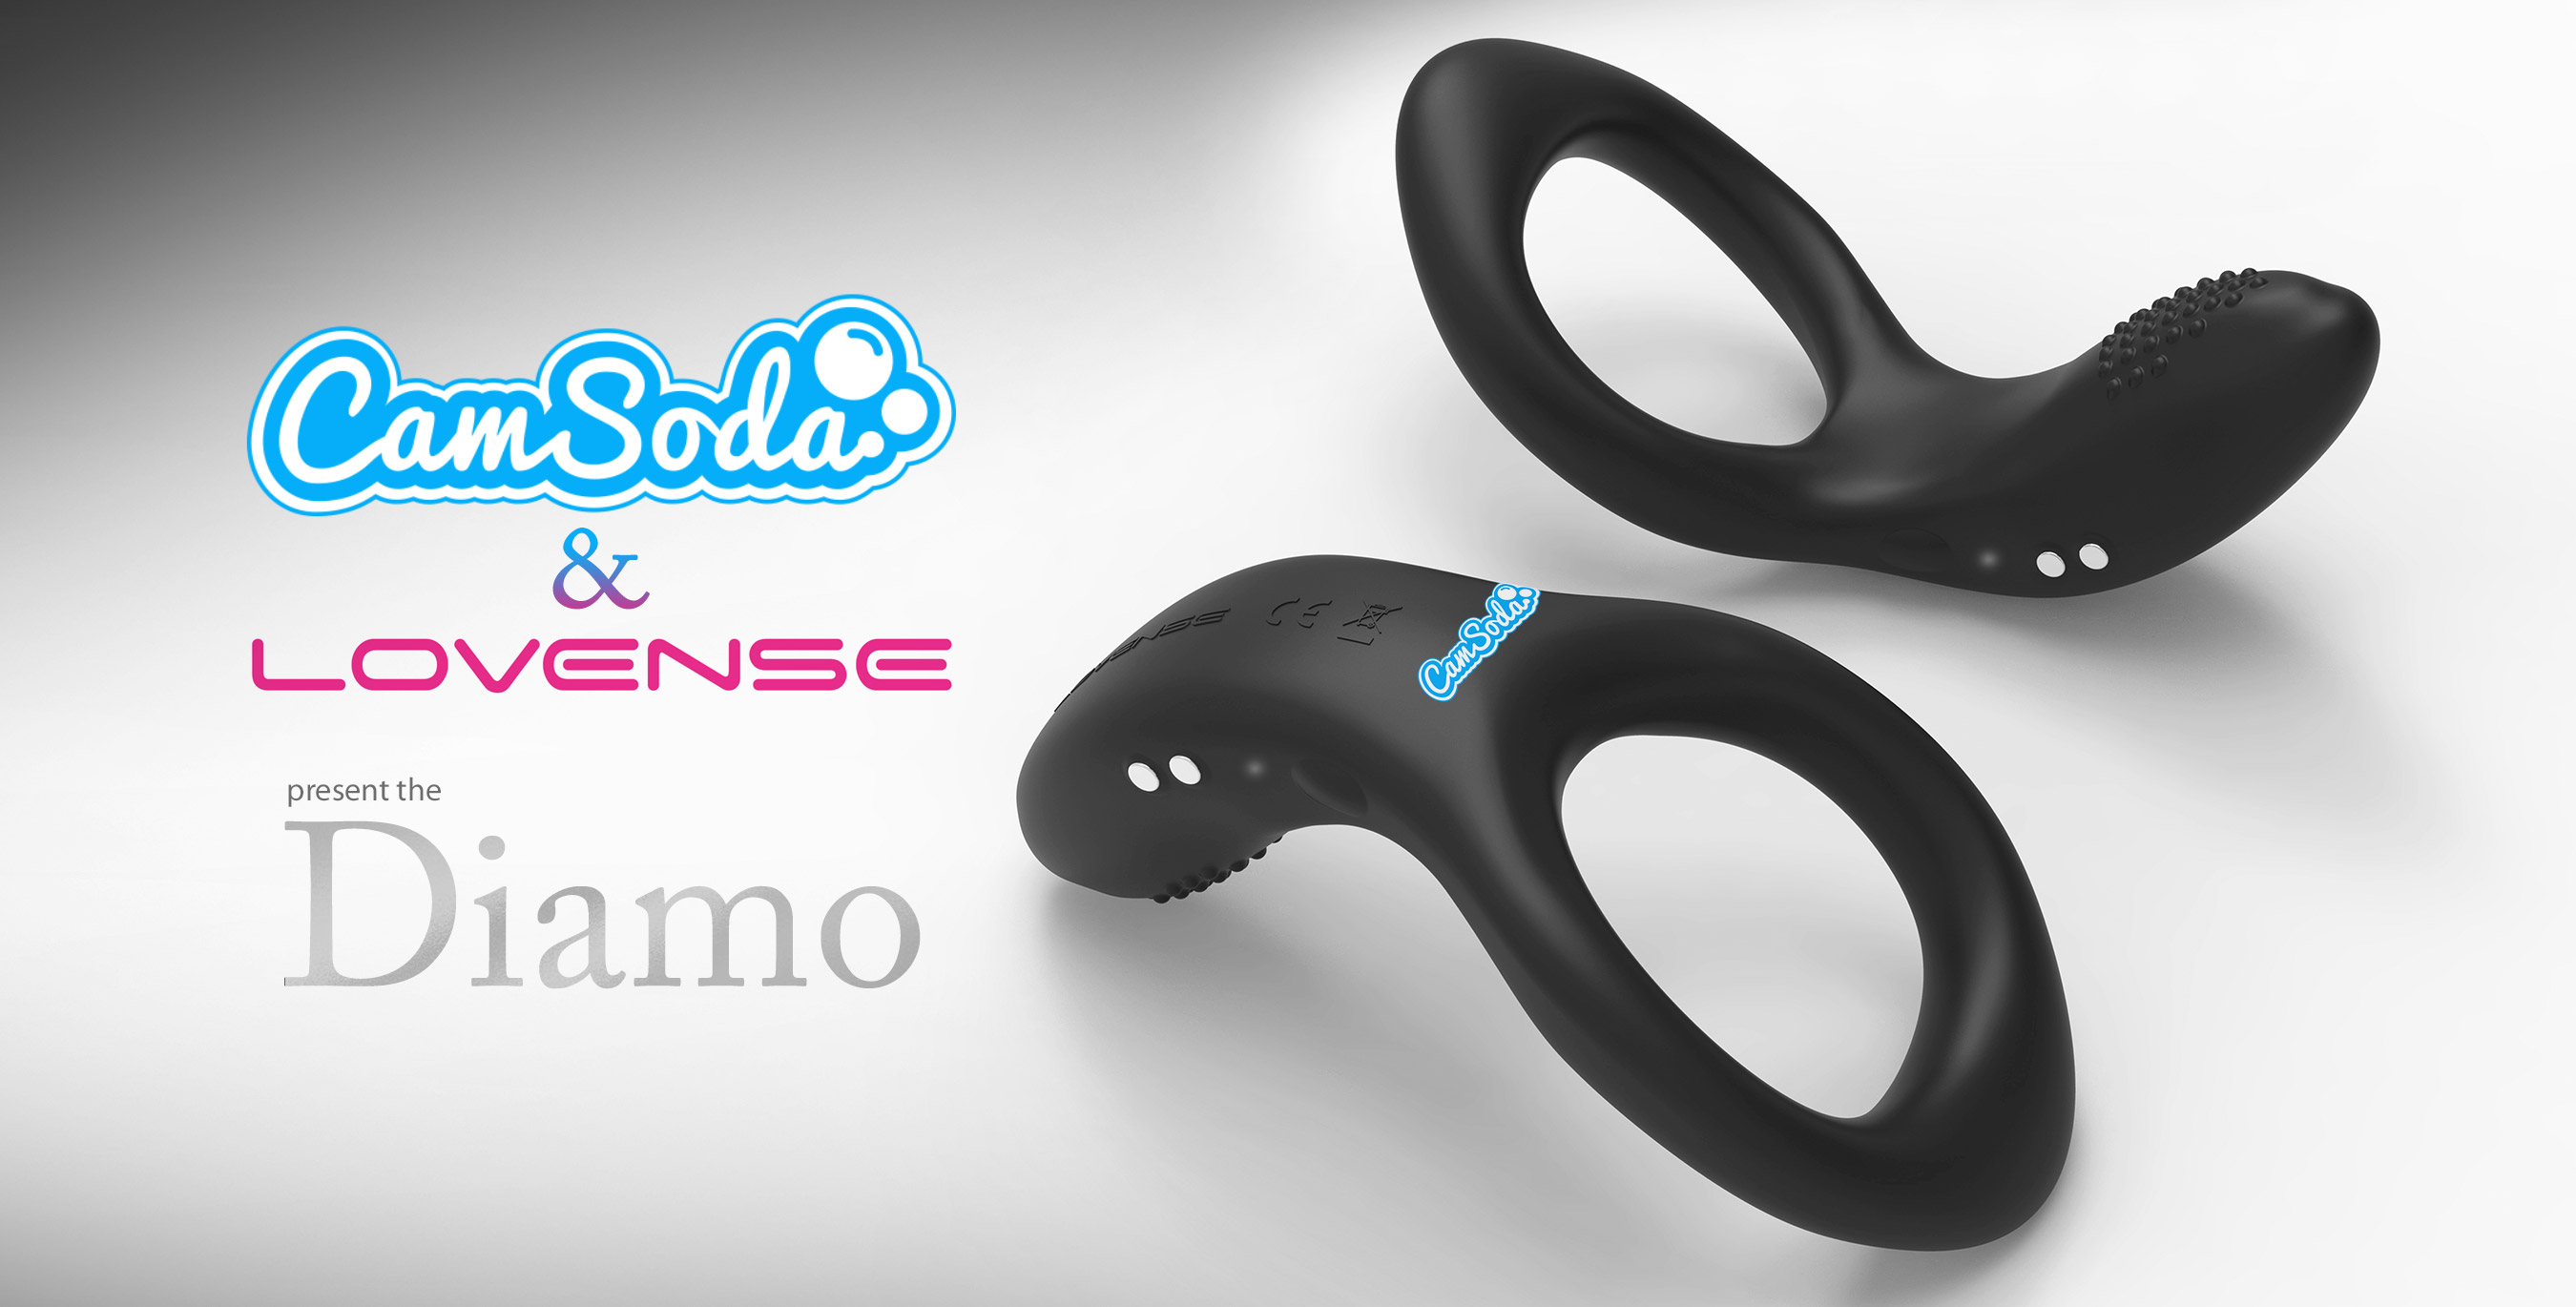 Camsoda And Lovense Team Up For New Product The Diamo